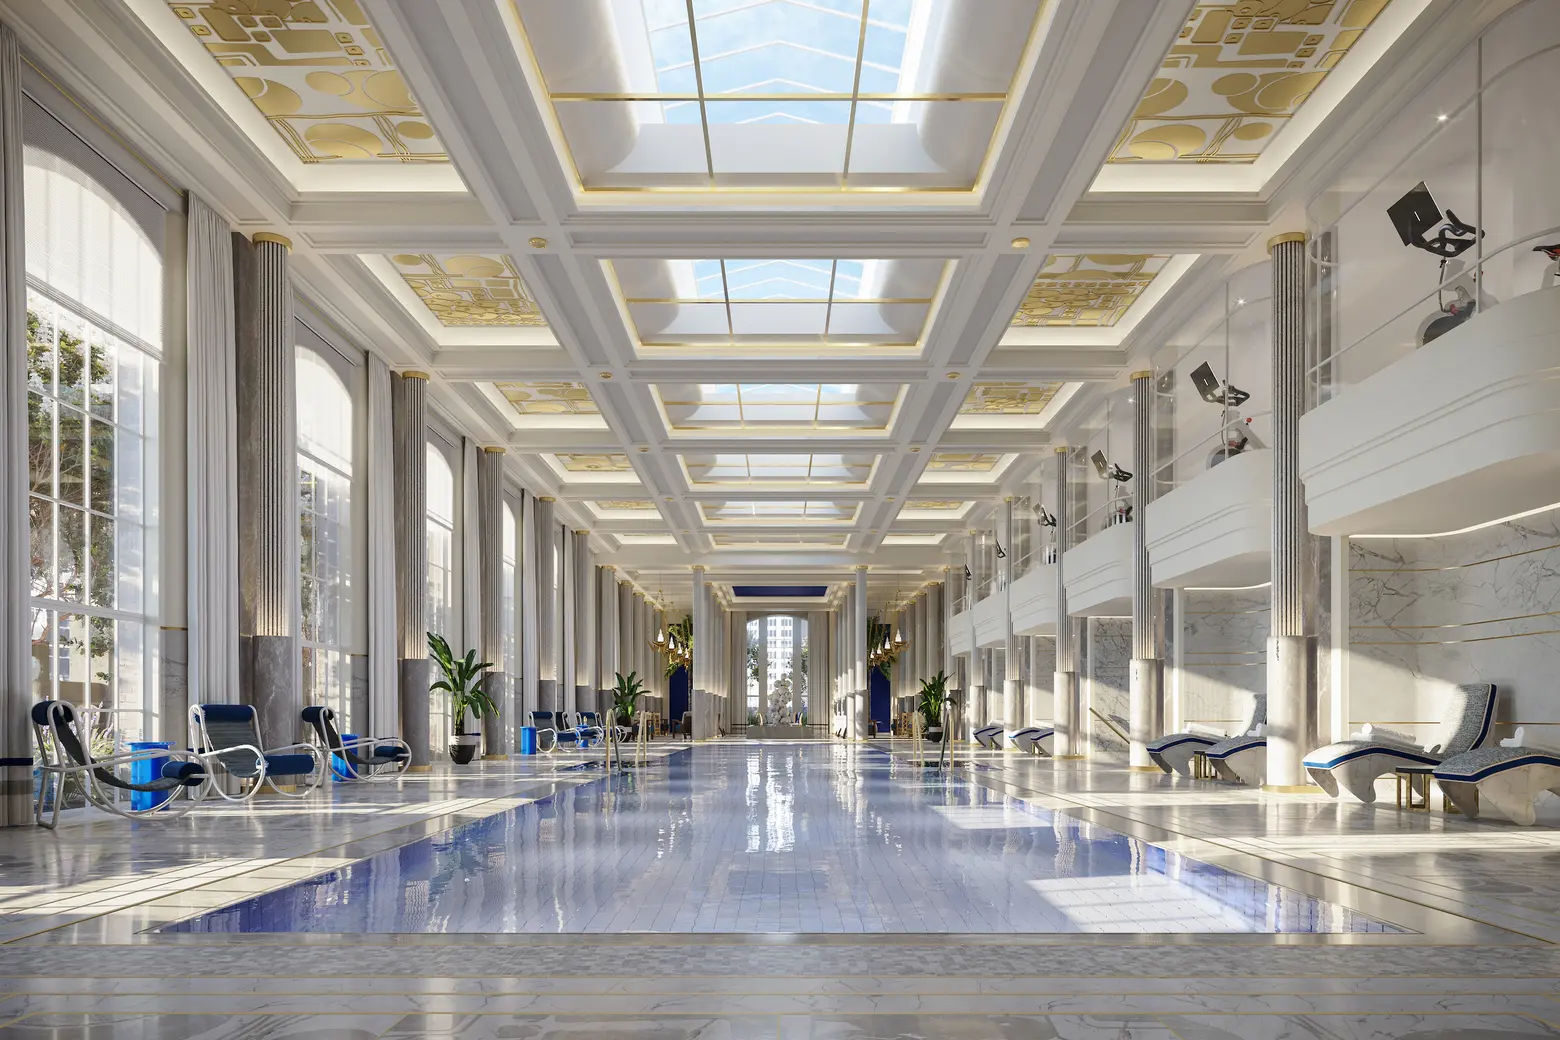 See the Waldorf Astoria’s glamorous, residents-only pool